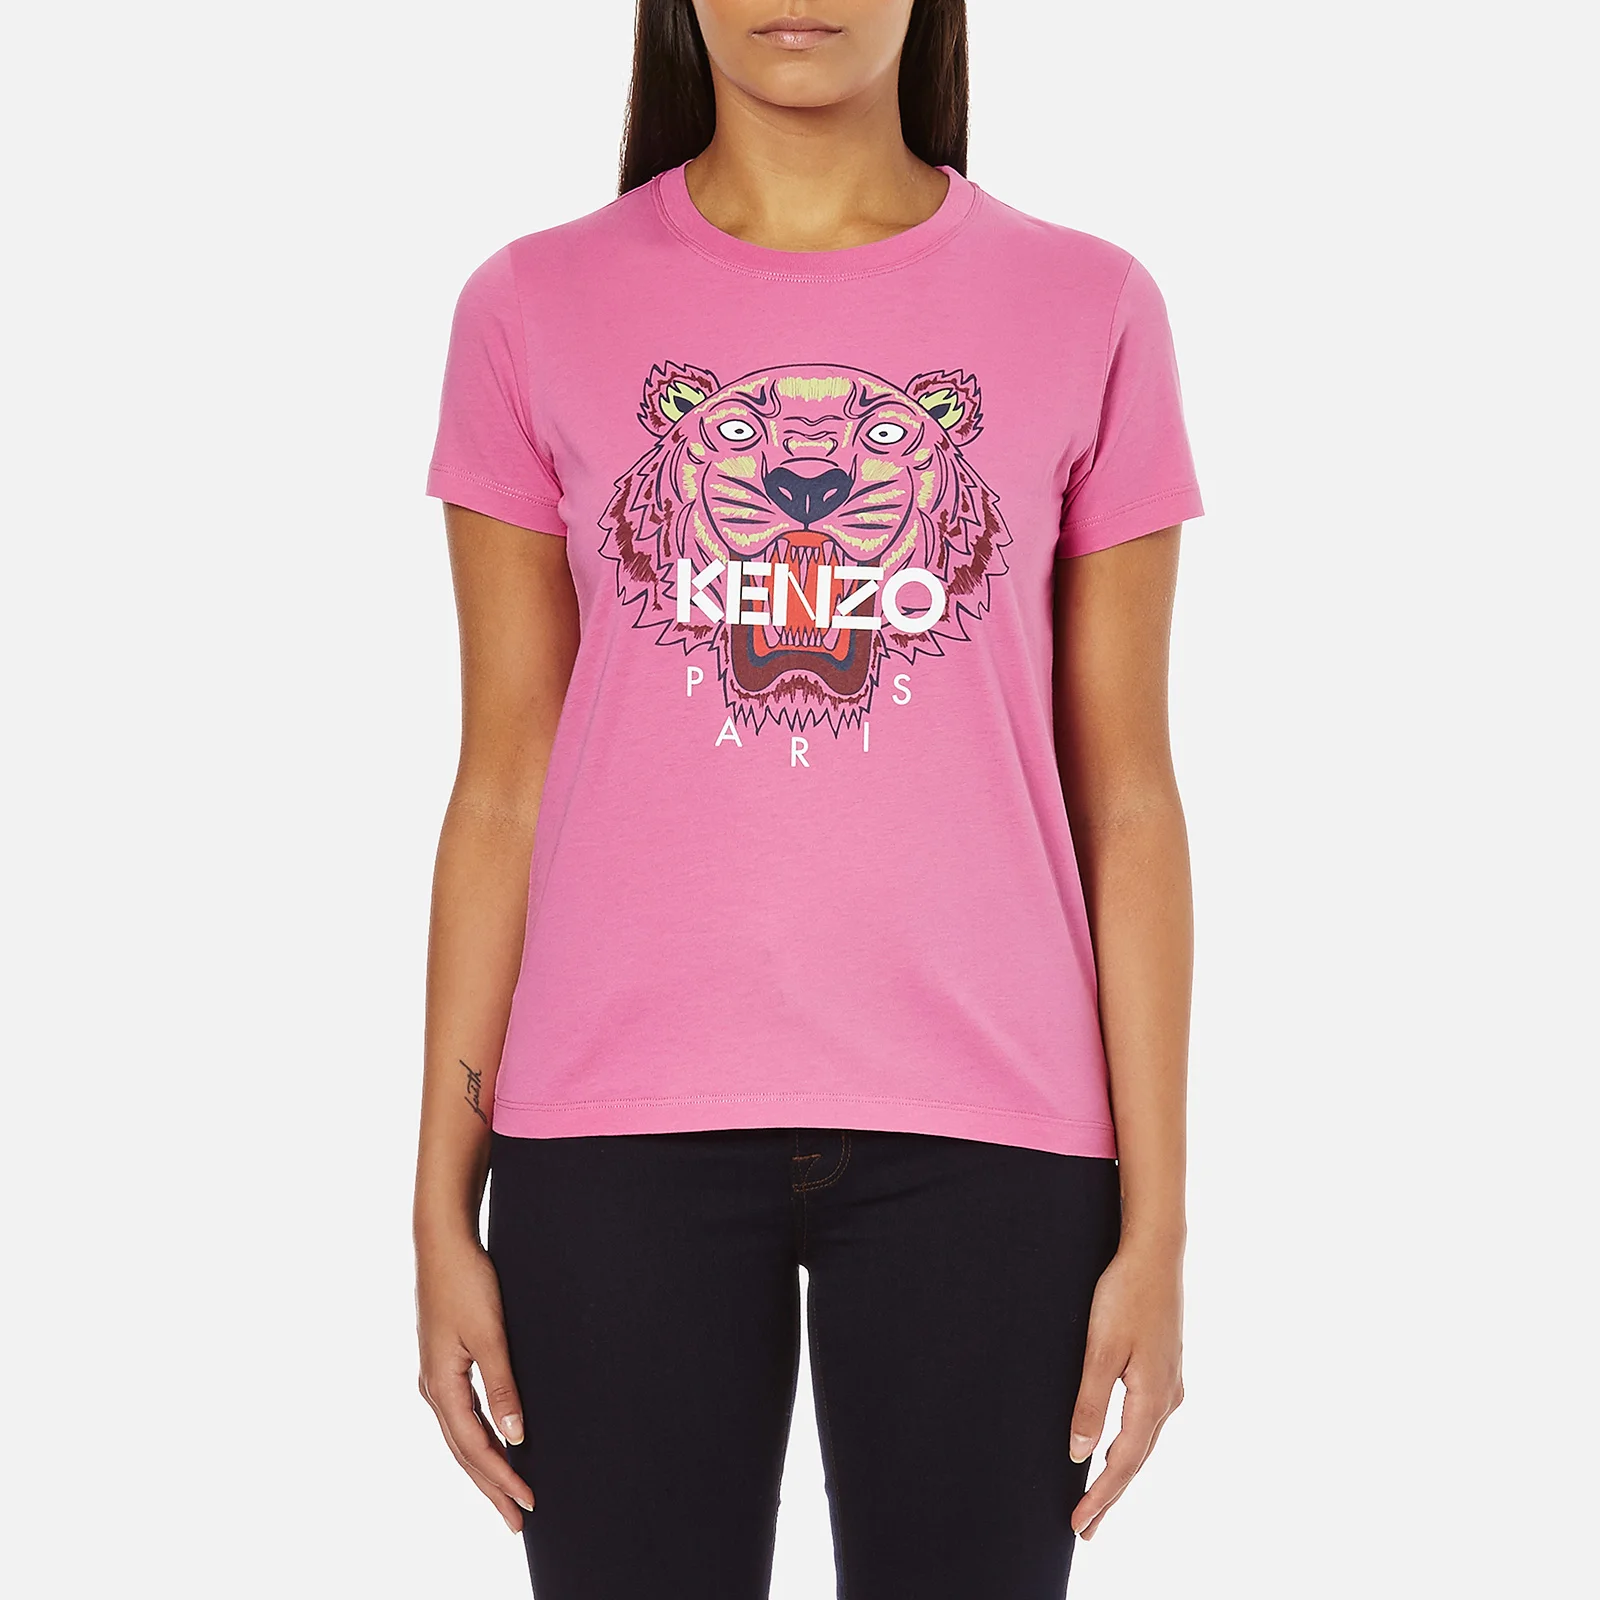 KENZO Women's Tiger Embroidered T-Shirt - Begonia Image 1